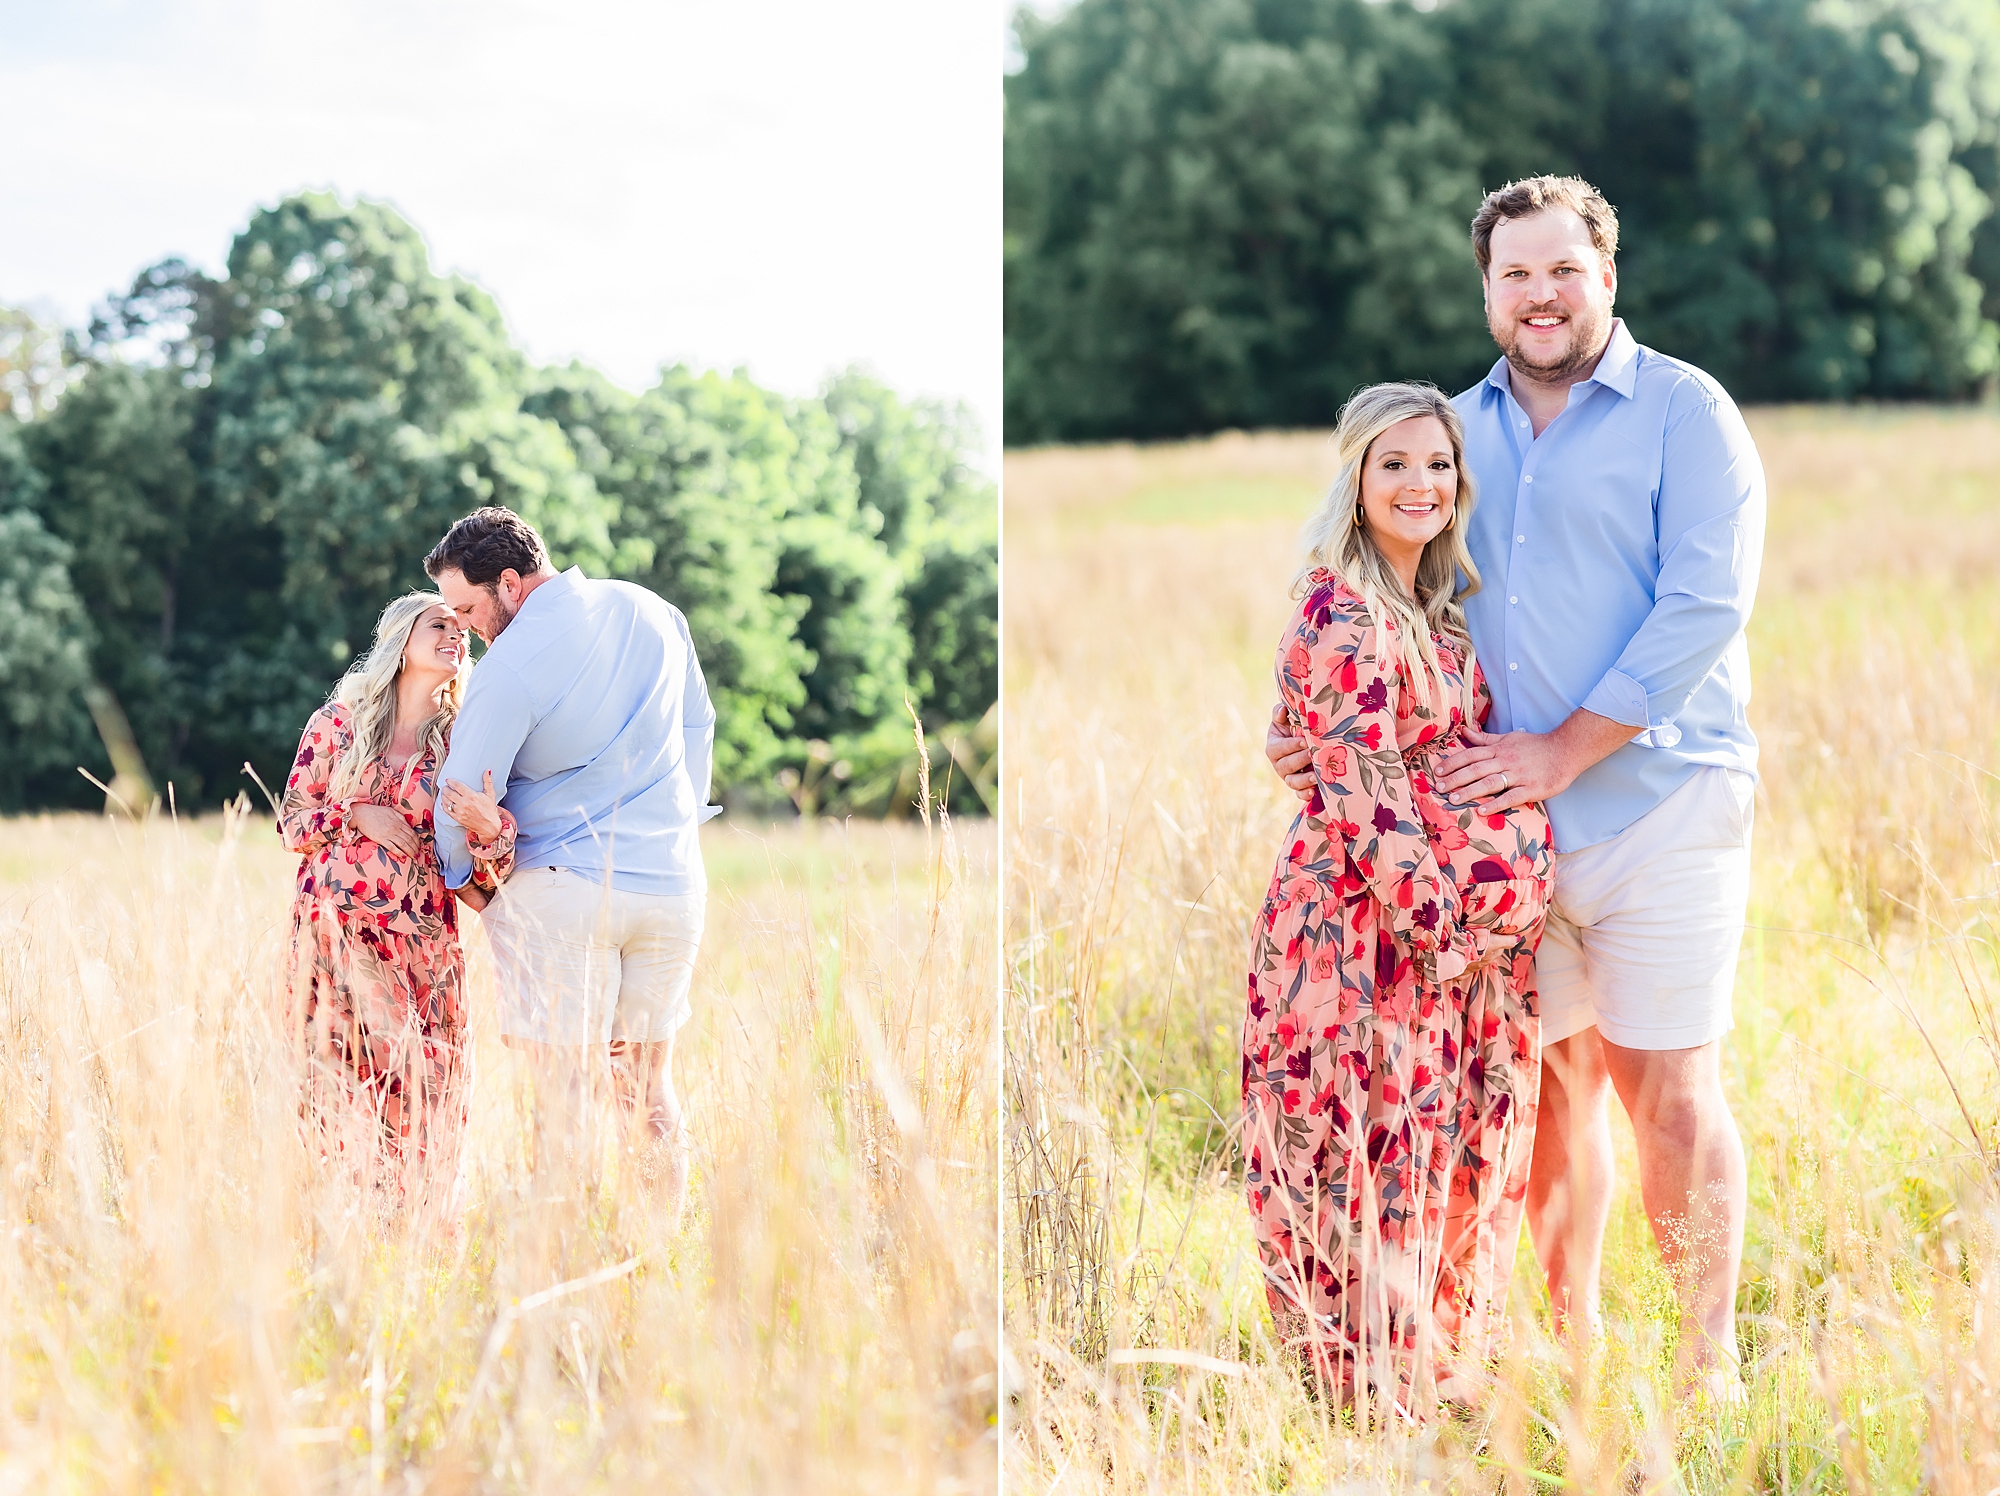 new parents stand together in field during maternity photos